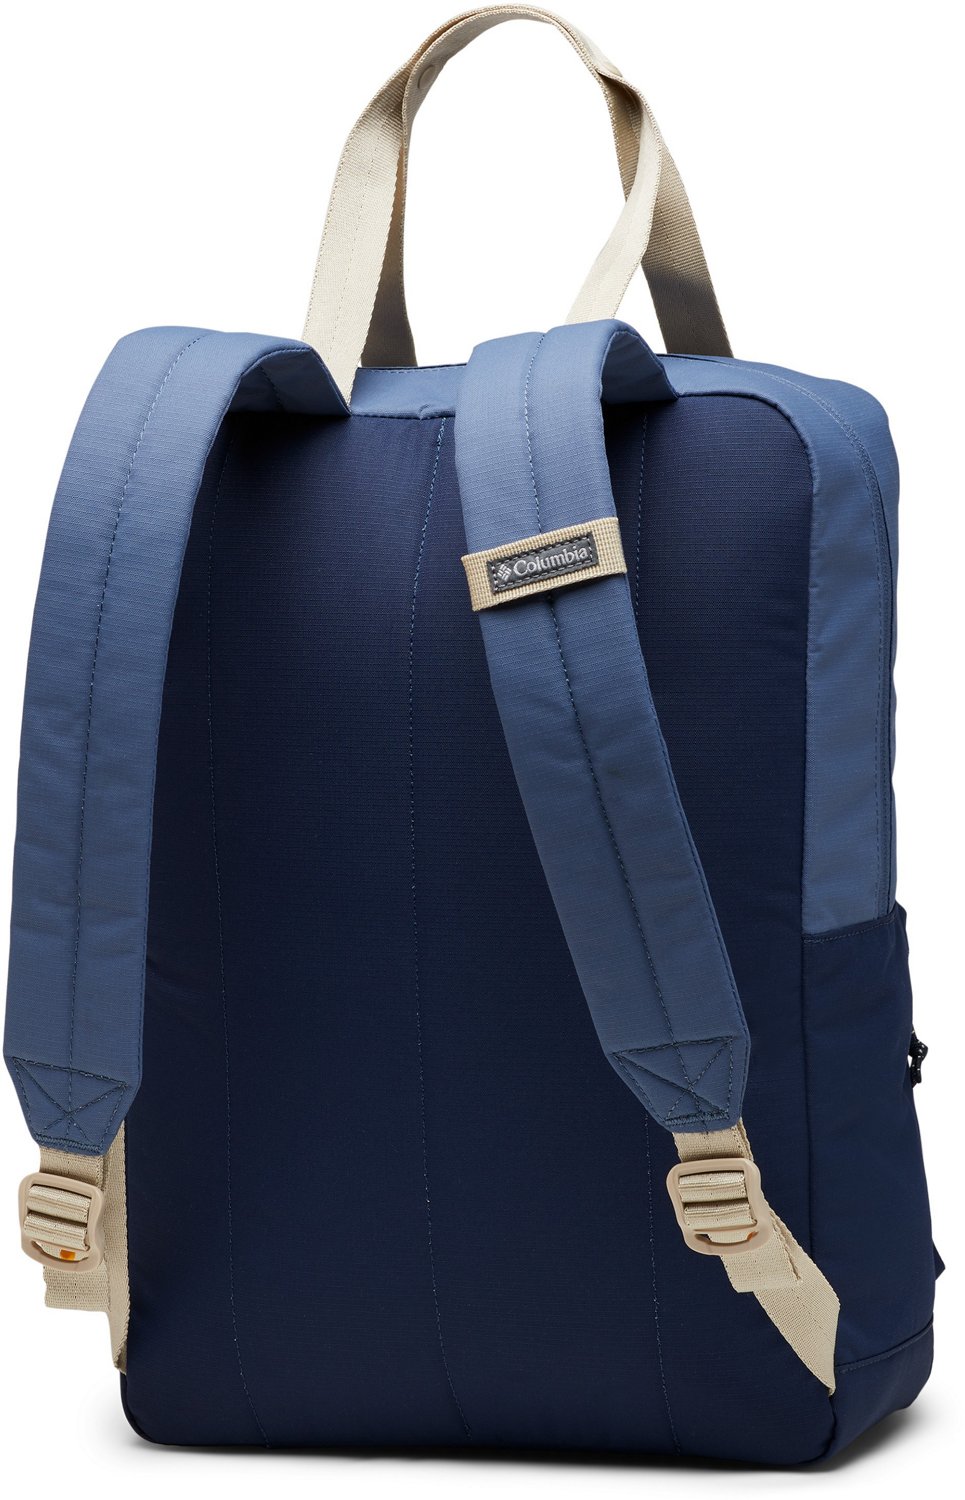 Columbia Sportswear Trek Backpack | Free Shipping at Academy